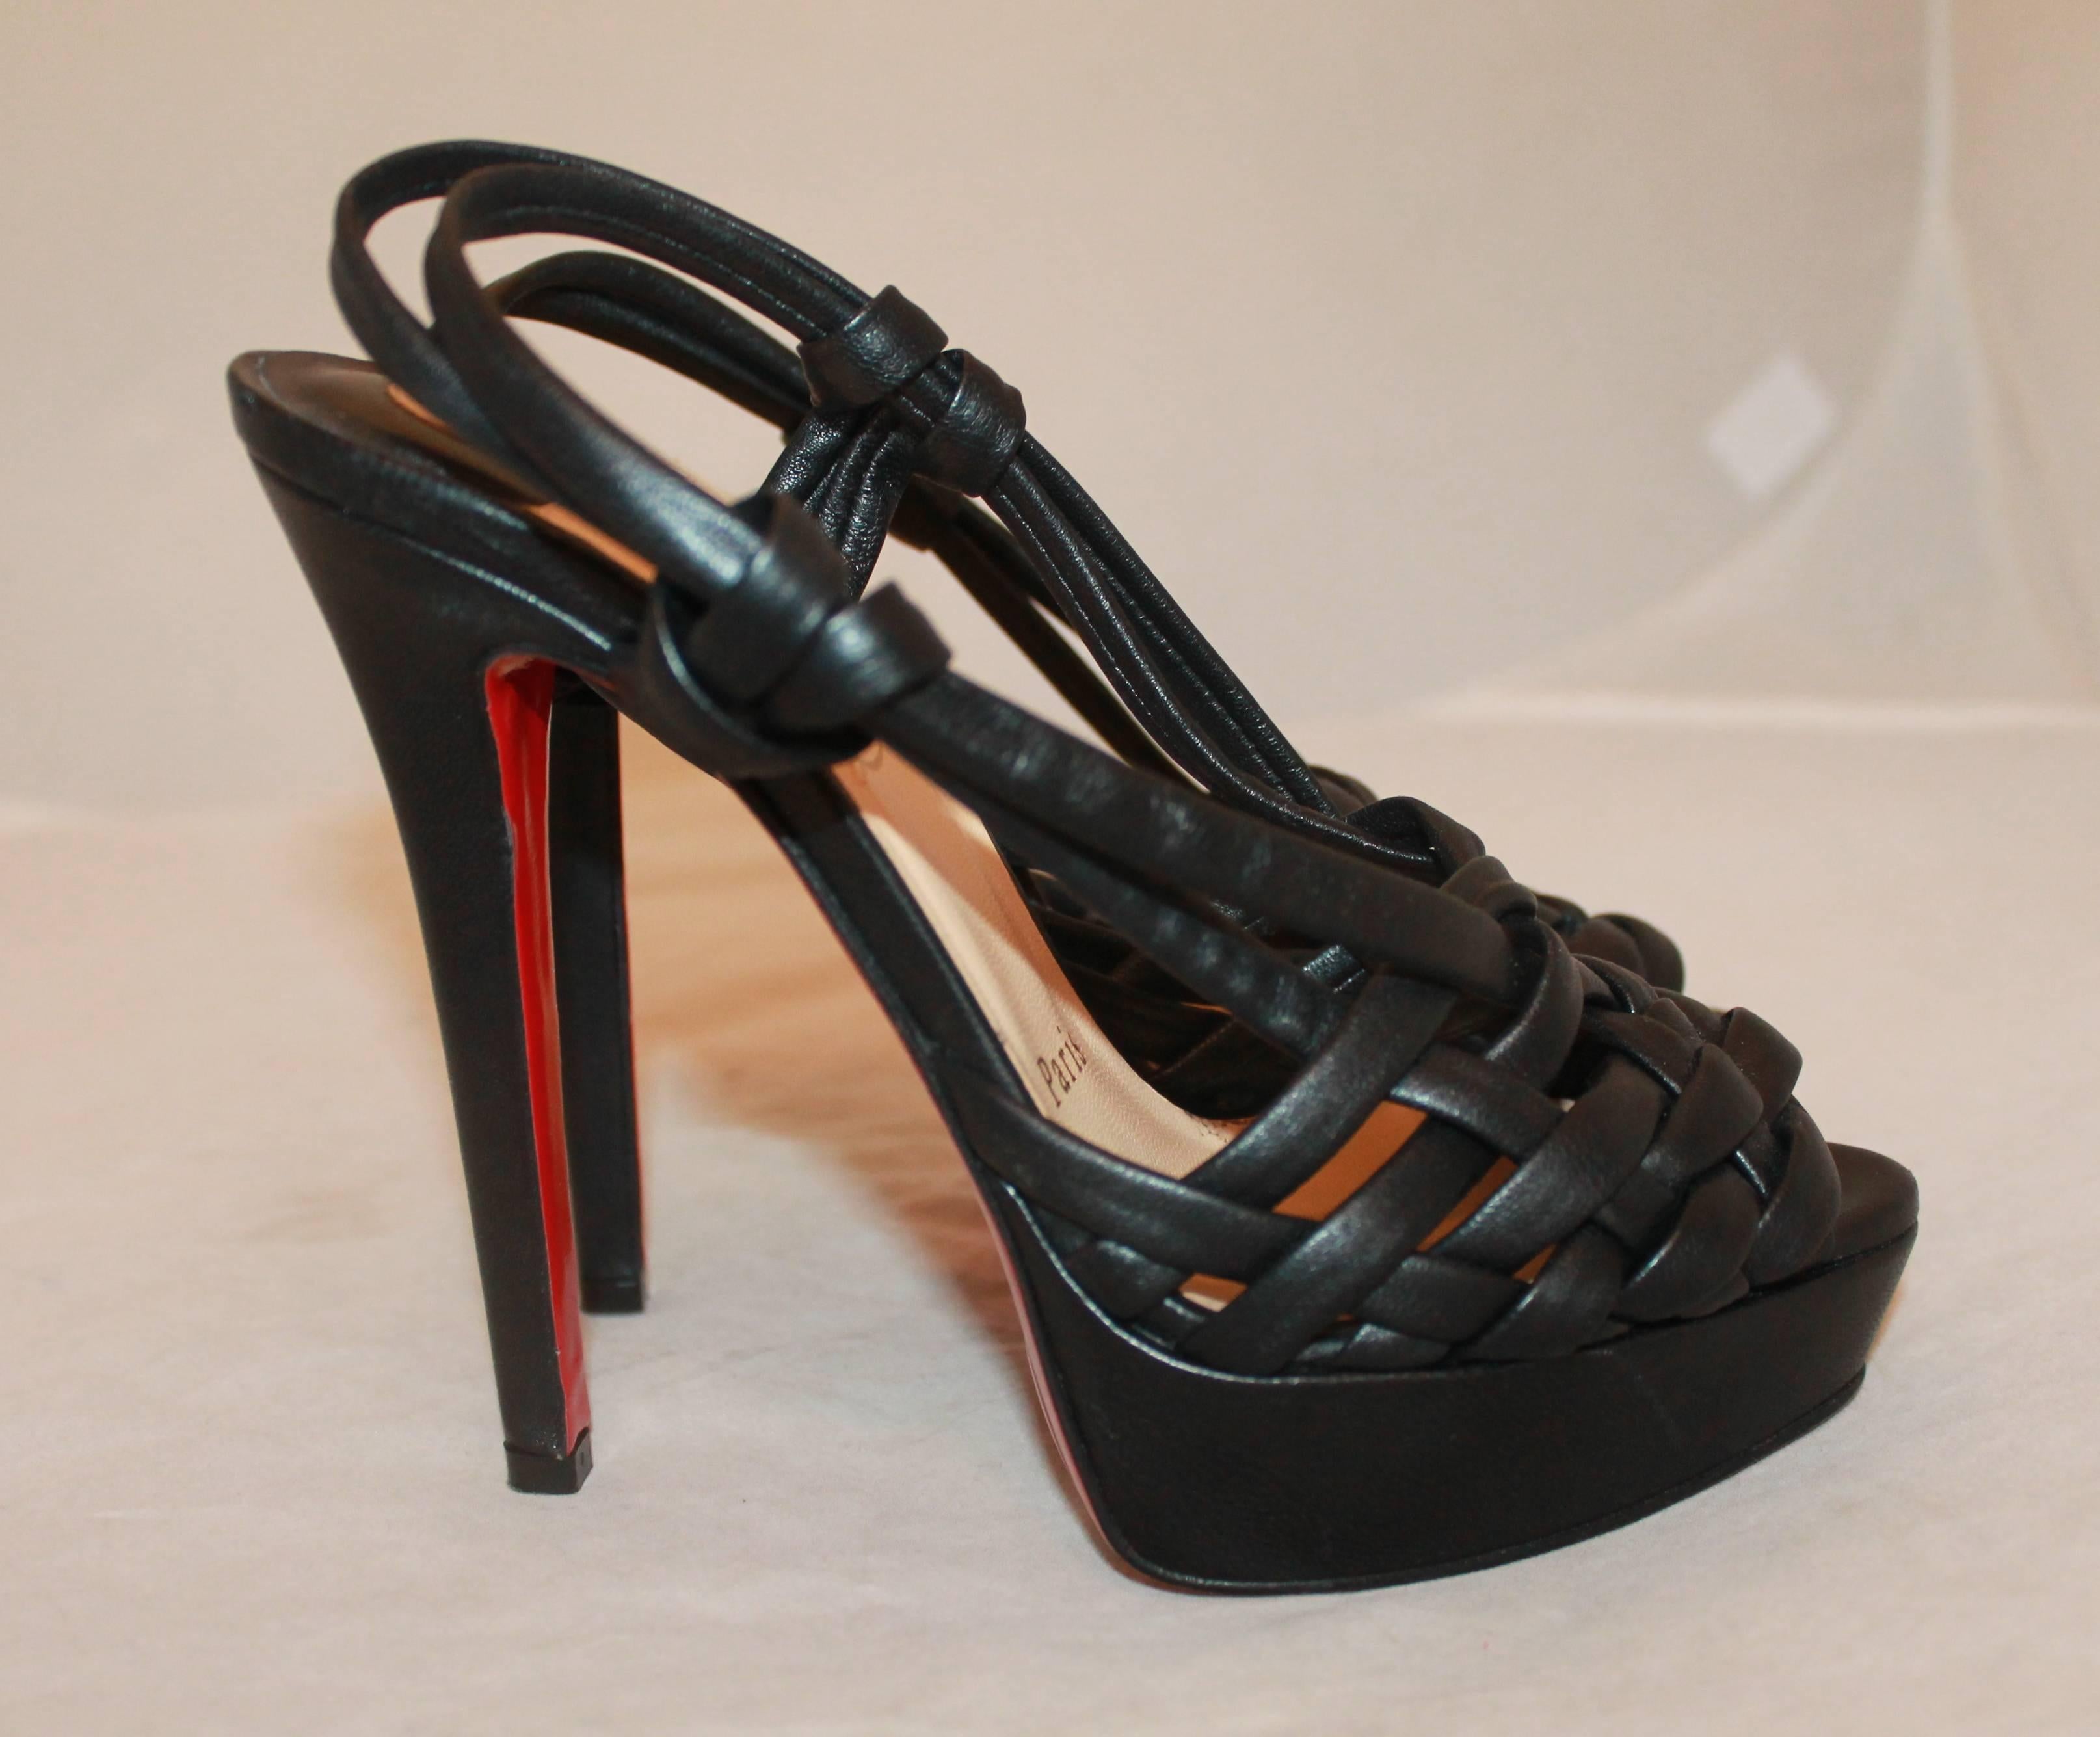 Christian Louboutin Black Leather Strappy Platform Heels - 36. This shoe is new and is in excellent condition. It is woven all along the front. 

Measurements:
Platform- 1.15